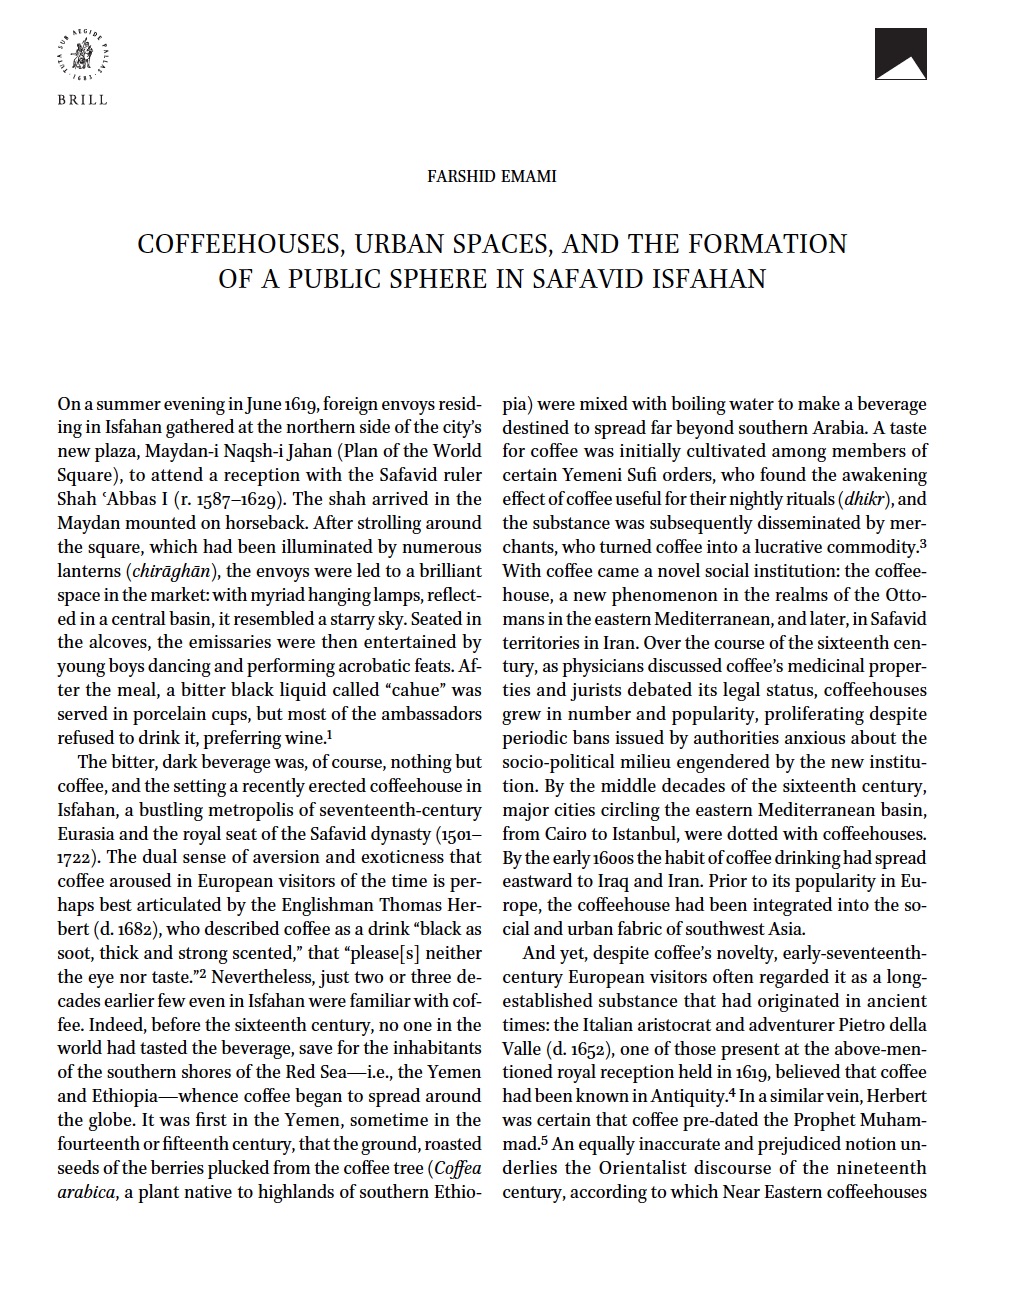 Chahar Bagh - <div style="text-align: justify;">This essay examines the urban topography, physical structure, and social context of coffeehouses in Safavid Iran (1501–1722), particularly in the capital city of Isfahan. Through a reconstruction of the architecture and urban configuration of coffeehouses, the essay shows how, as an utterly novel institution, the coffeehouse opened up a new sphere of public life, engendered new conceptions of urbanity, and altered the social meaning of urban spaces. The essay will specifically focus on the drinking houses that existed in the Maydan-i Naqsh-i Jahan and Khiyaban-i Chaharbagh, the grand urban spaces of seventeenth-century Isfahan. The remaining physical traces, together with textual and visual evidence, permit us to reconstruct Isfahan’s major coffeehouses. This analysis not only reveals a less-appreciated aspect of urbanity in the age of Shah ʿAbbas (r. 1587–1629) but also elucidates the ways in which the public spaces of Safavid Isfahan contained and shaped novel social practices particular to the early modern age.<br></div>